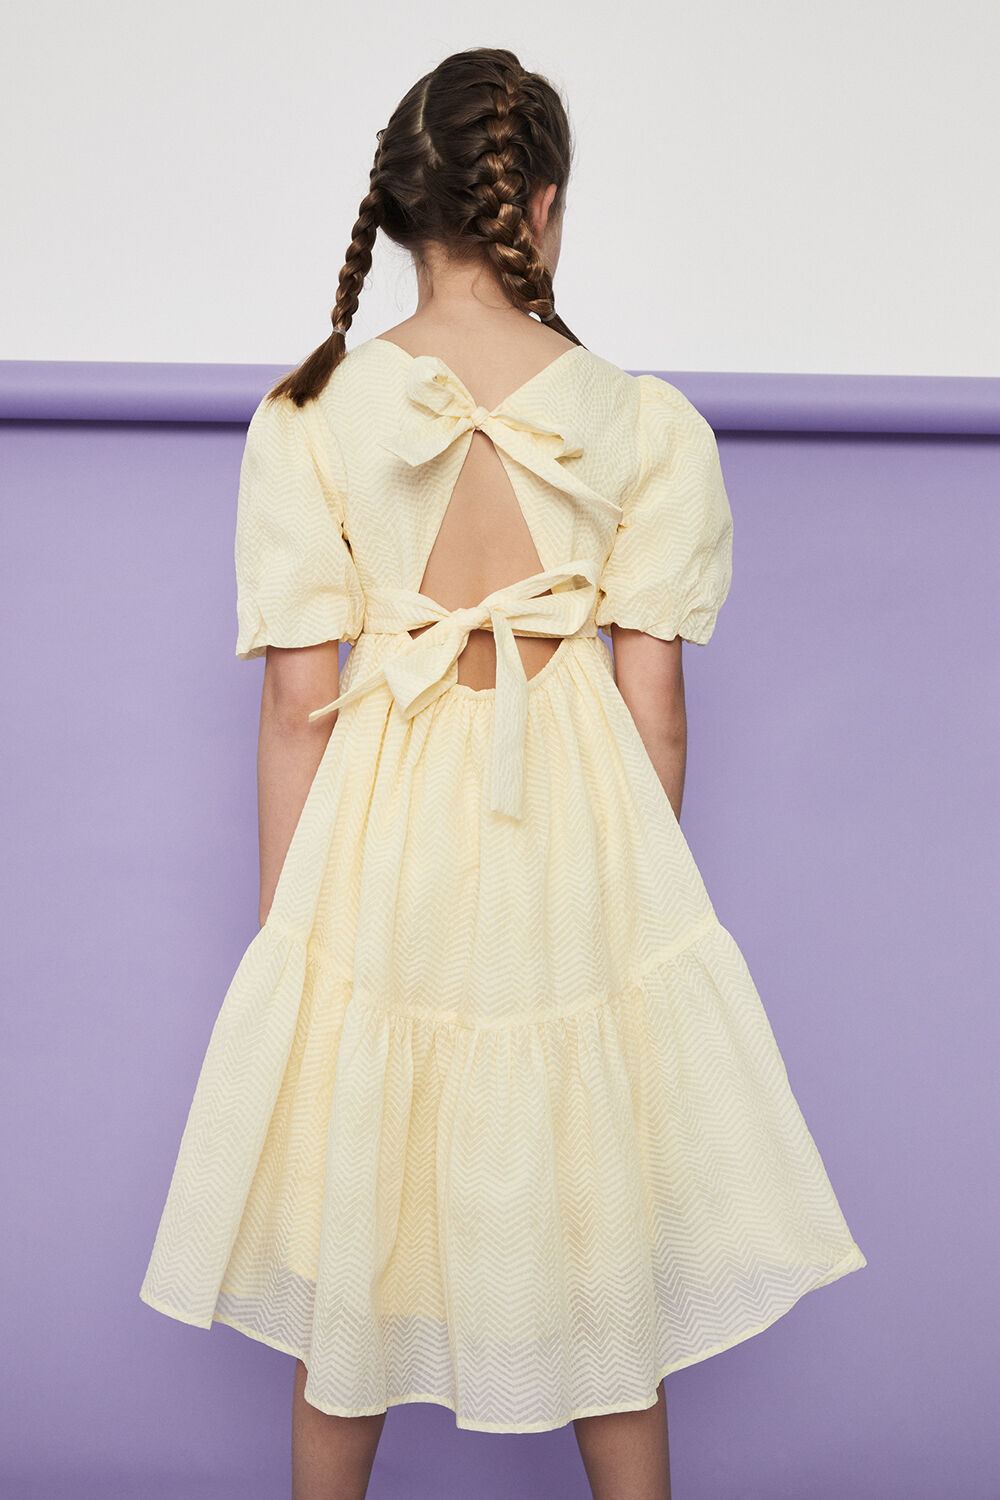 SUMMER YELLOW TIERED DRESS in colour TENDER YELLOW